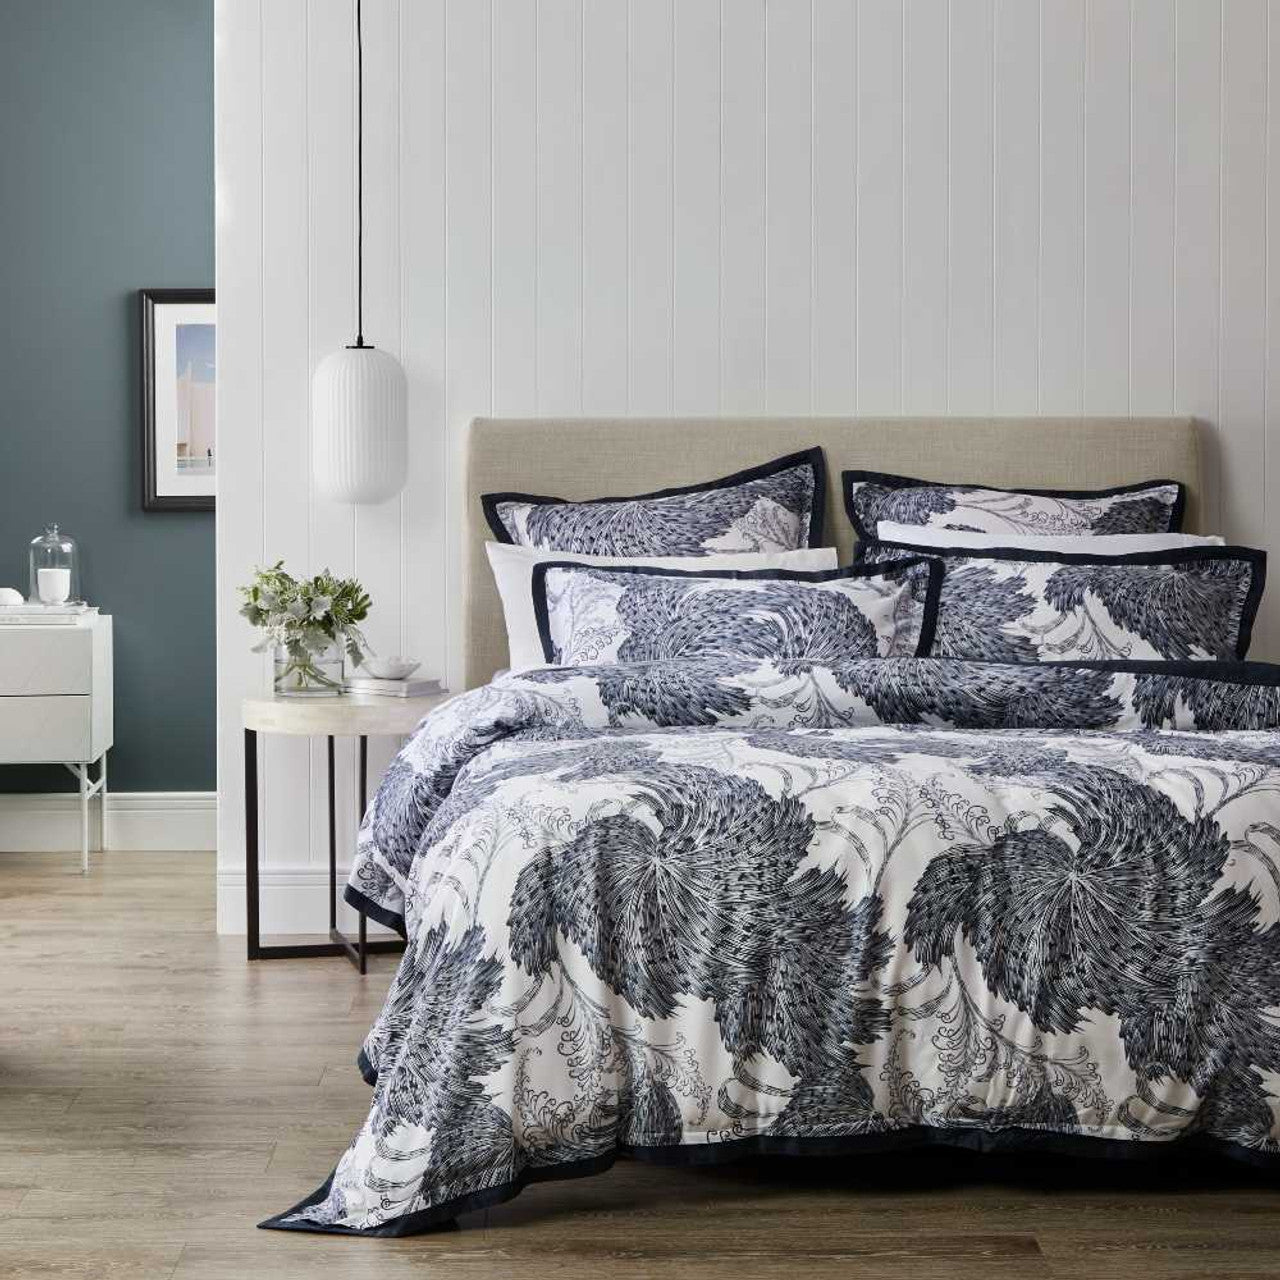 Step into a world of luxurious resort-style living with the Sago Ink Bed Quilt Cover Set from Private Collection. This exquisite set offers a monochromatic escape, immersing you in an atmosphere of opulence. The design showcases oversized hand-drawn elements in striking navy and crisp white, creating a bold and captivating visual statement. 